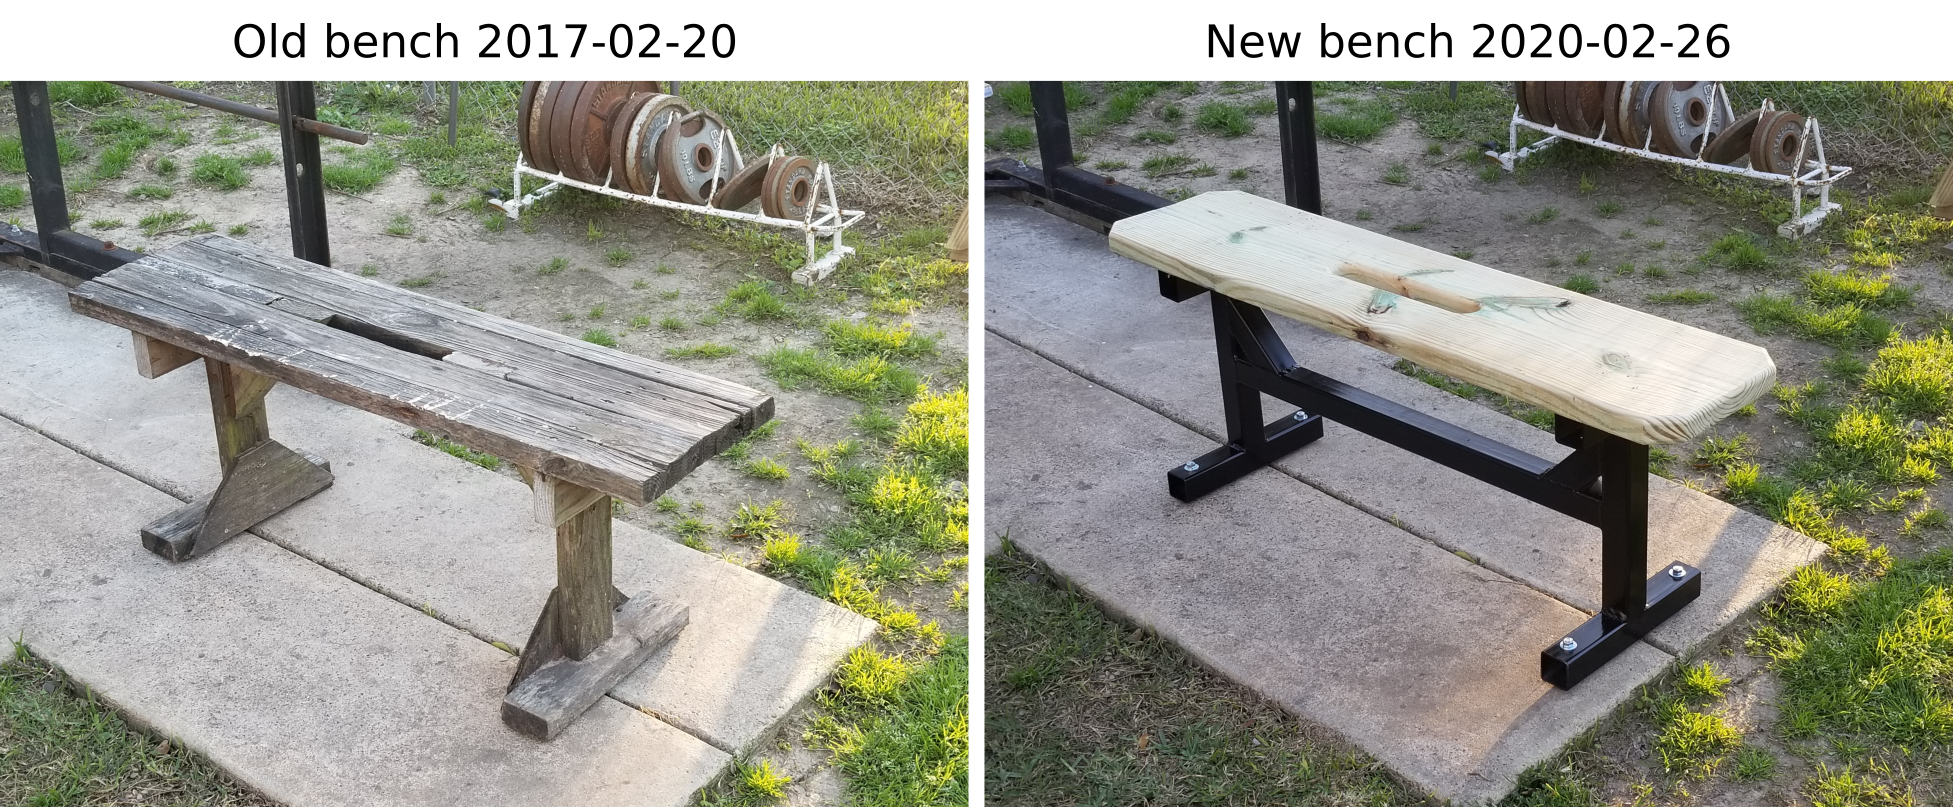 fabricated new bench